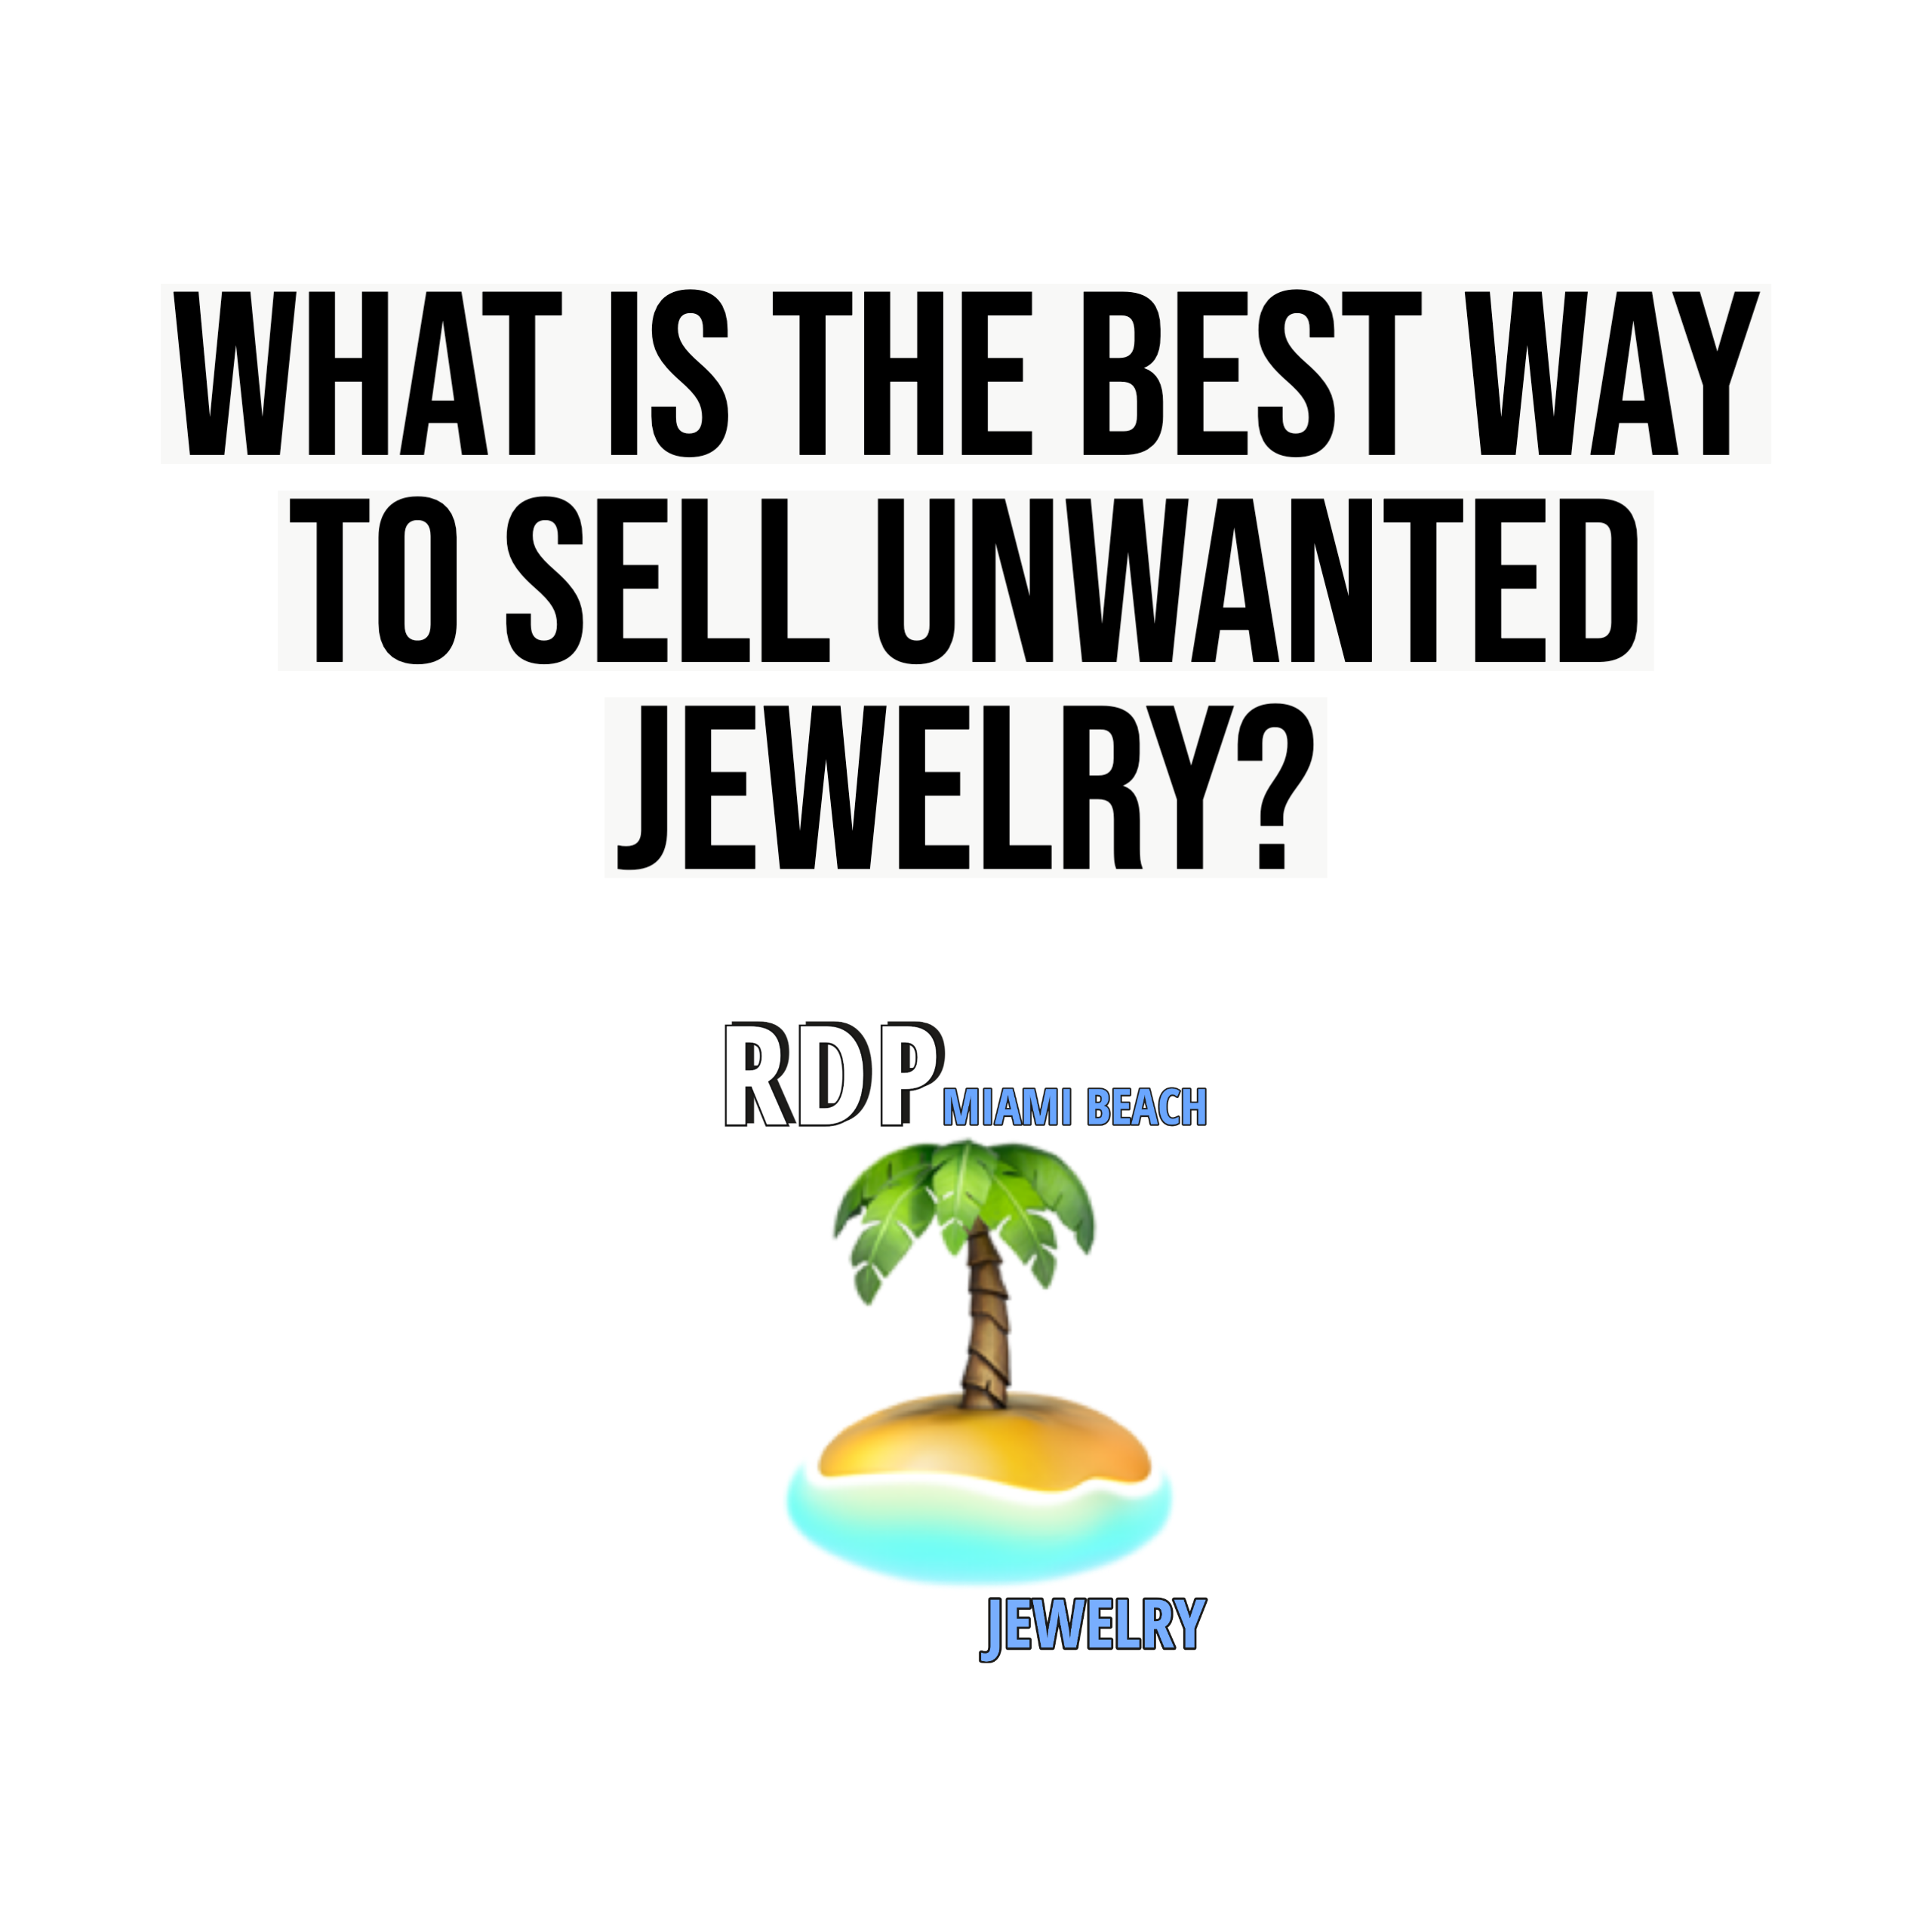 What is the best way to sell unwanted jewellery